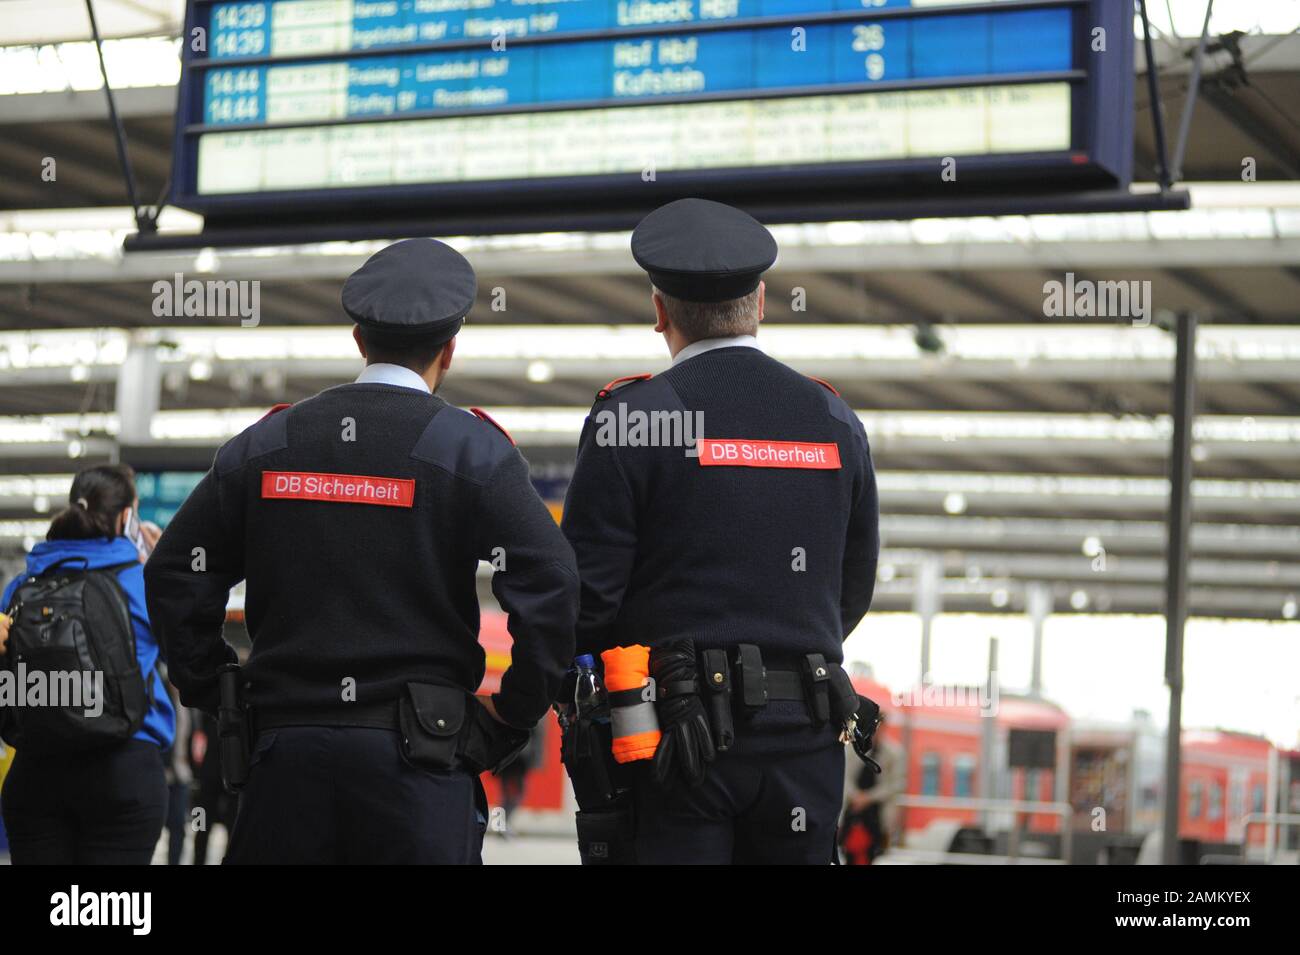 A strike by the train drivers' union GDL has paralyzed the S-Bahn and long-distance trains in Munich to a large extent. The picture shows two DB Sicherheit employees in front of a display board at the main station with train cancellations in the main station. [automated translation] Stock Photo